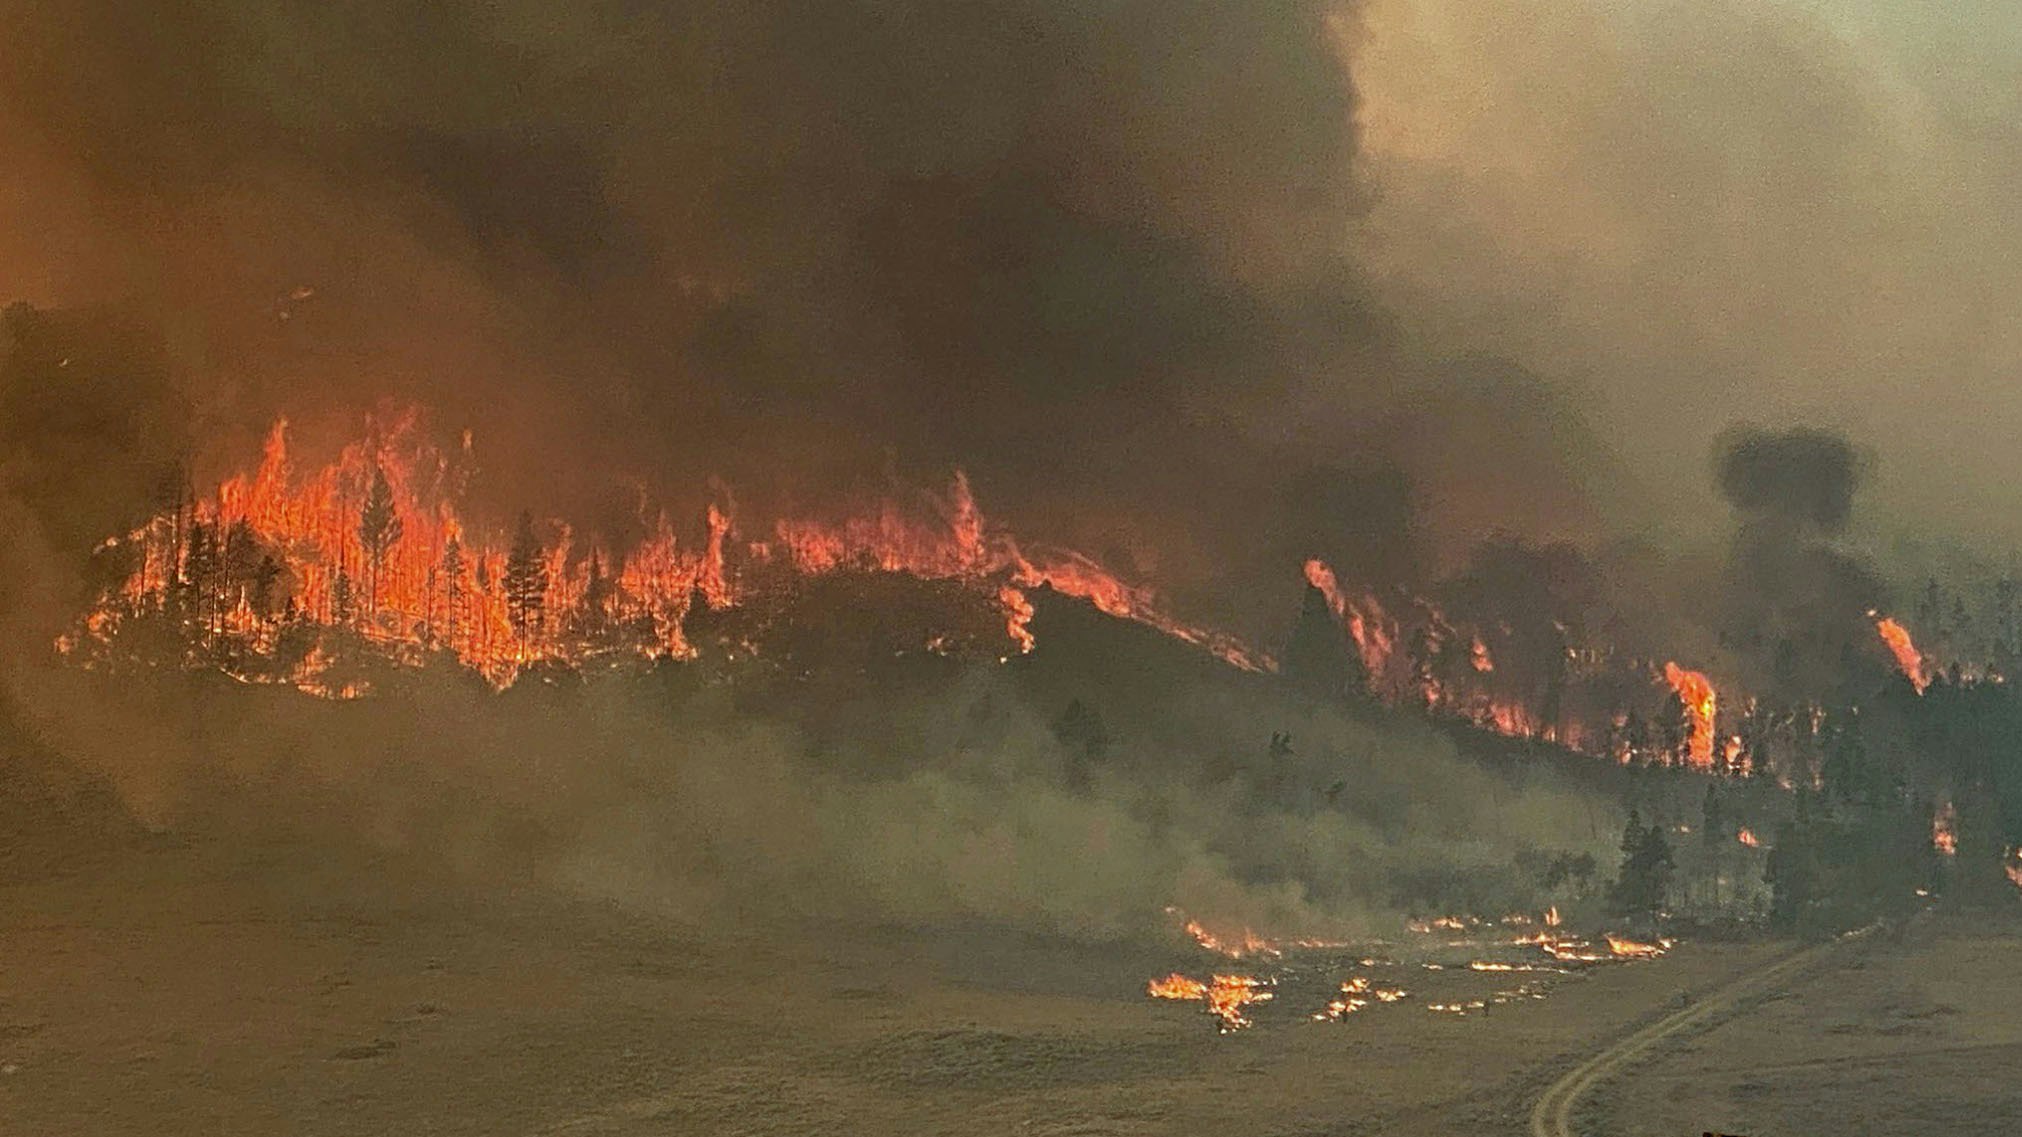 The Mullen Fire that broke out in September 2020 in the Snowy Range Mountains West of Laramie, burned 180,000 acres.